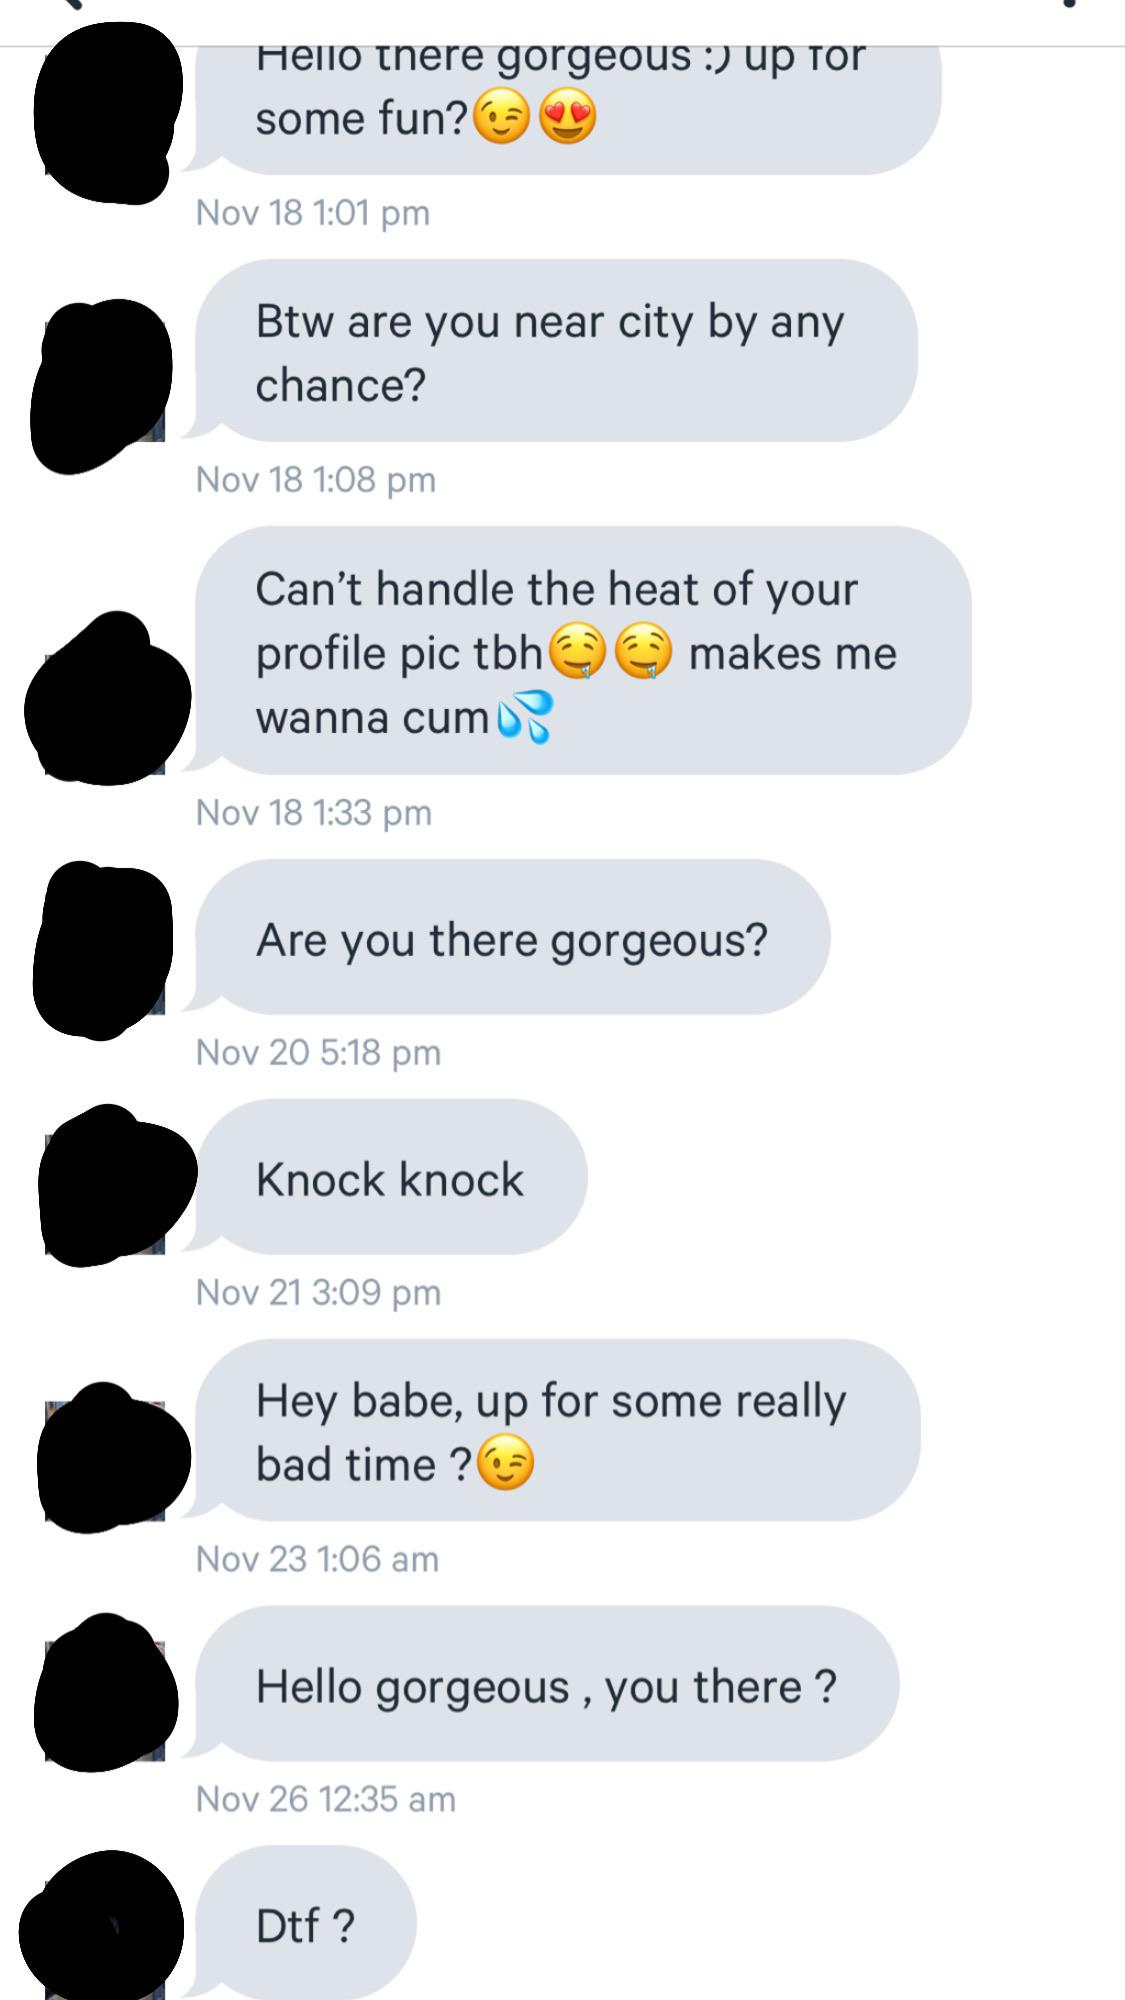 screenshot - Hello there gorgeous up to some fun? Nov 18 Btw are you near city by any chance? Nov 18 Can't handle the heat of your profile pic tbh makes me wanna cum Nov 18 Are you there gorgeous? Nov 20 Knock knock Nov 21 Hey babe, up for some really bad